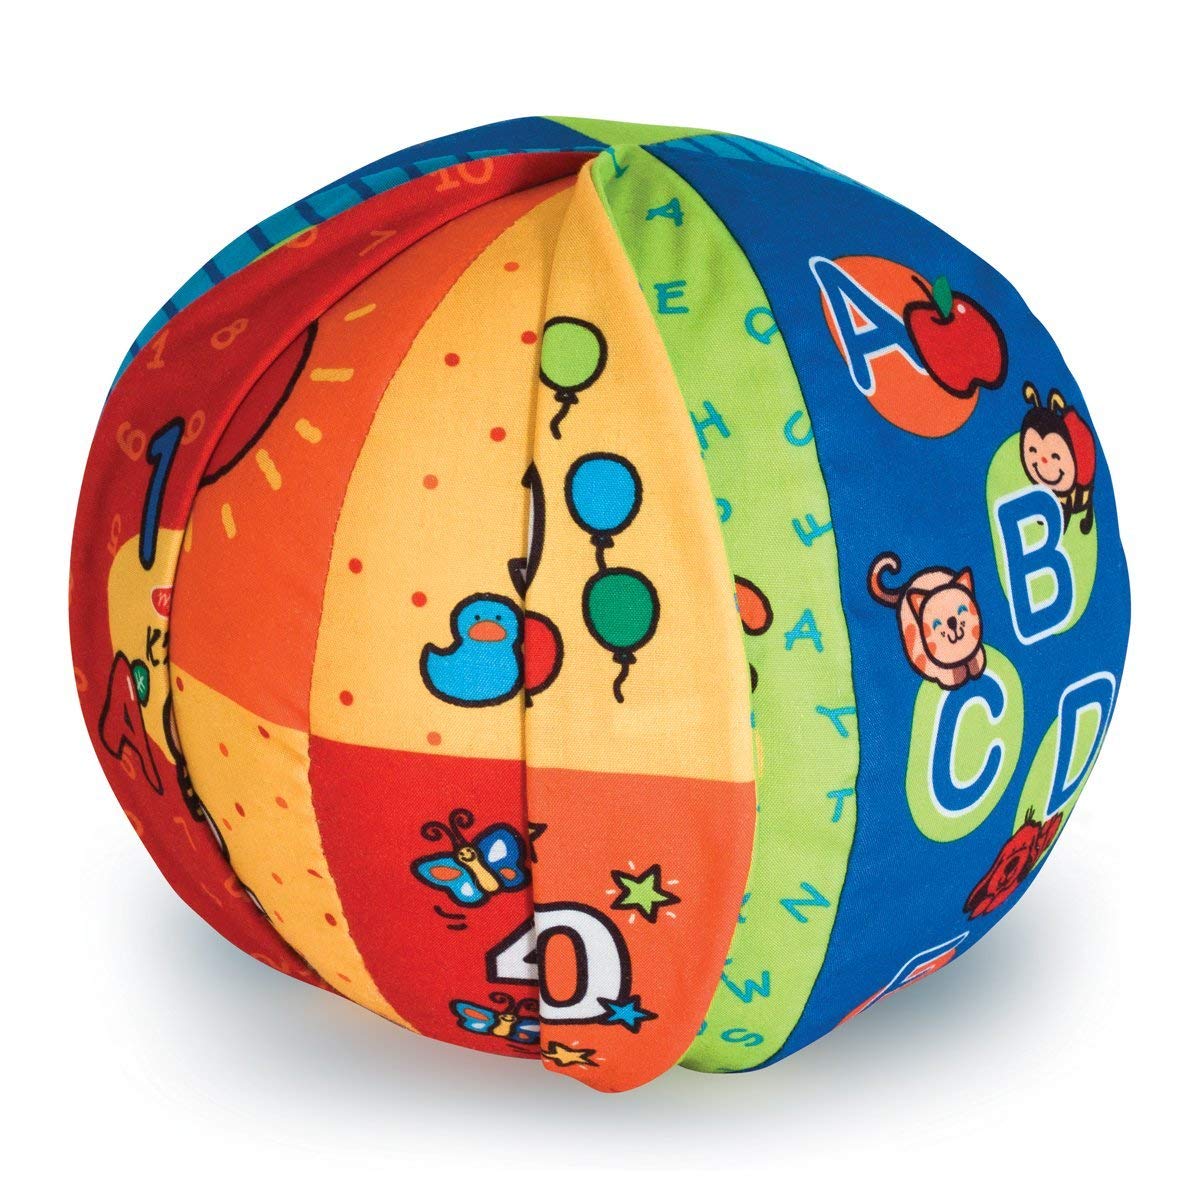 Melissa & Doug 2-in-1 Talking Ball: K's K i d s Series Learning Toy Bundle with 1 Theme Compatible M&D Scratch Fun Mini-Pad (09181)